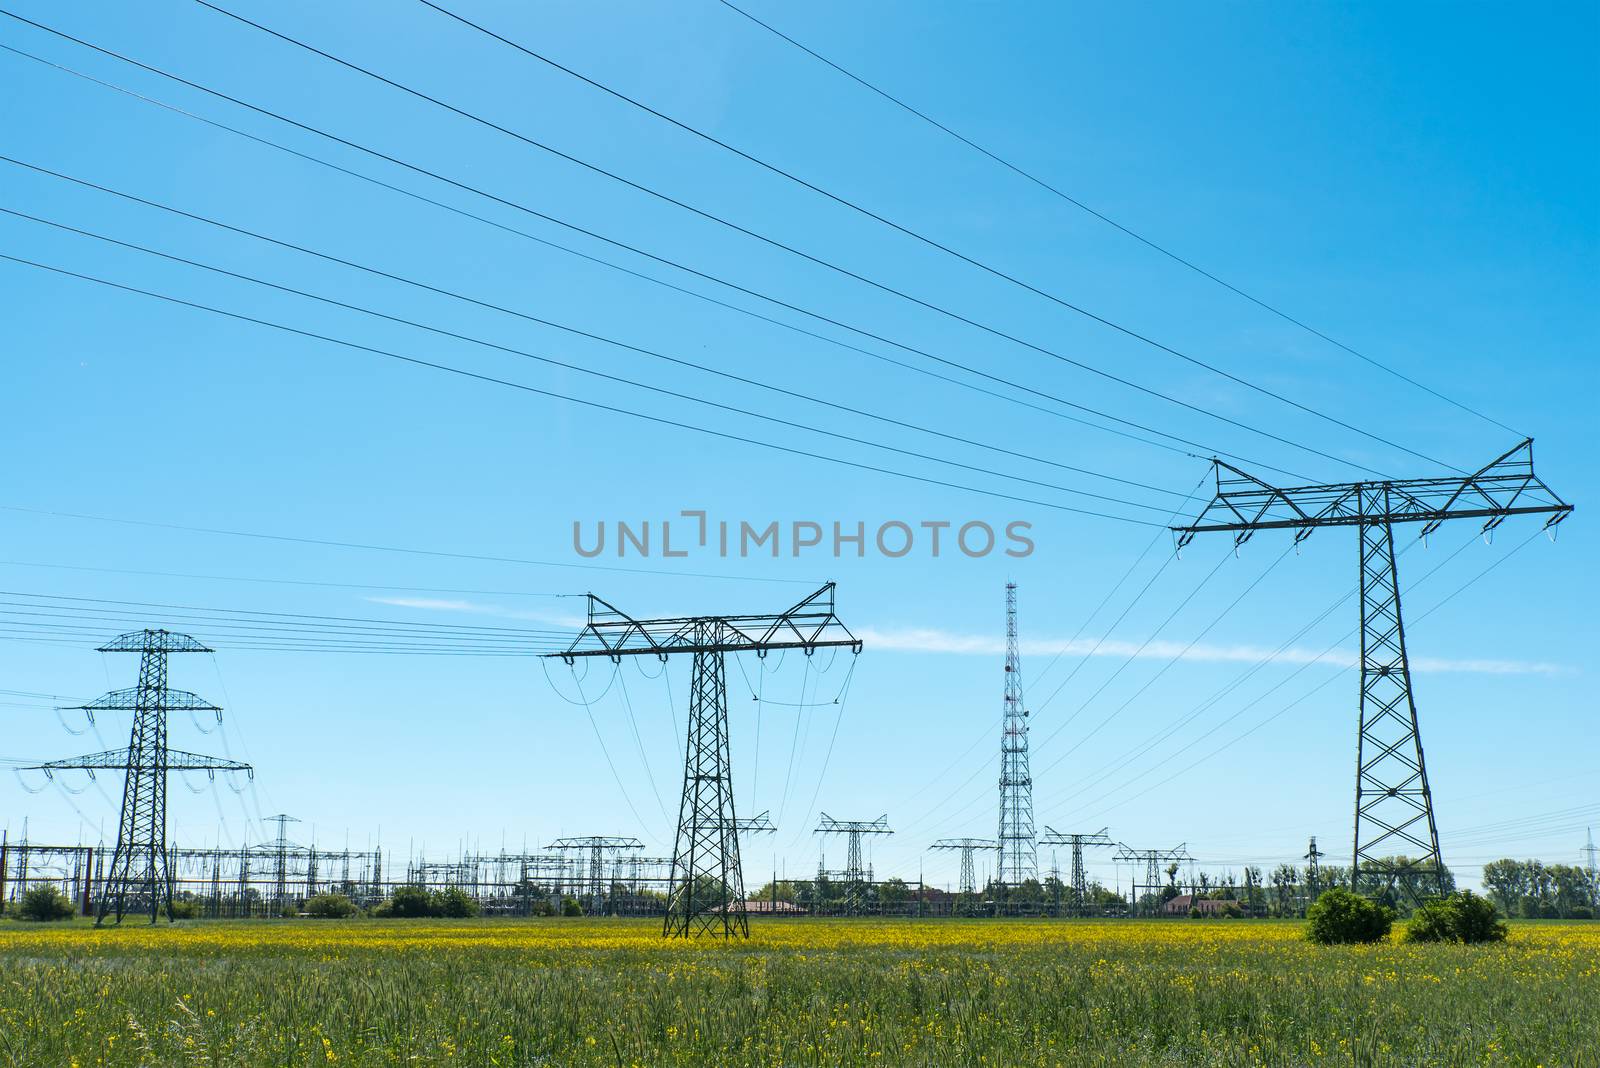 Relay station and power transmission lines seen in Germany